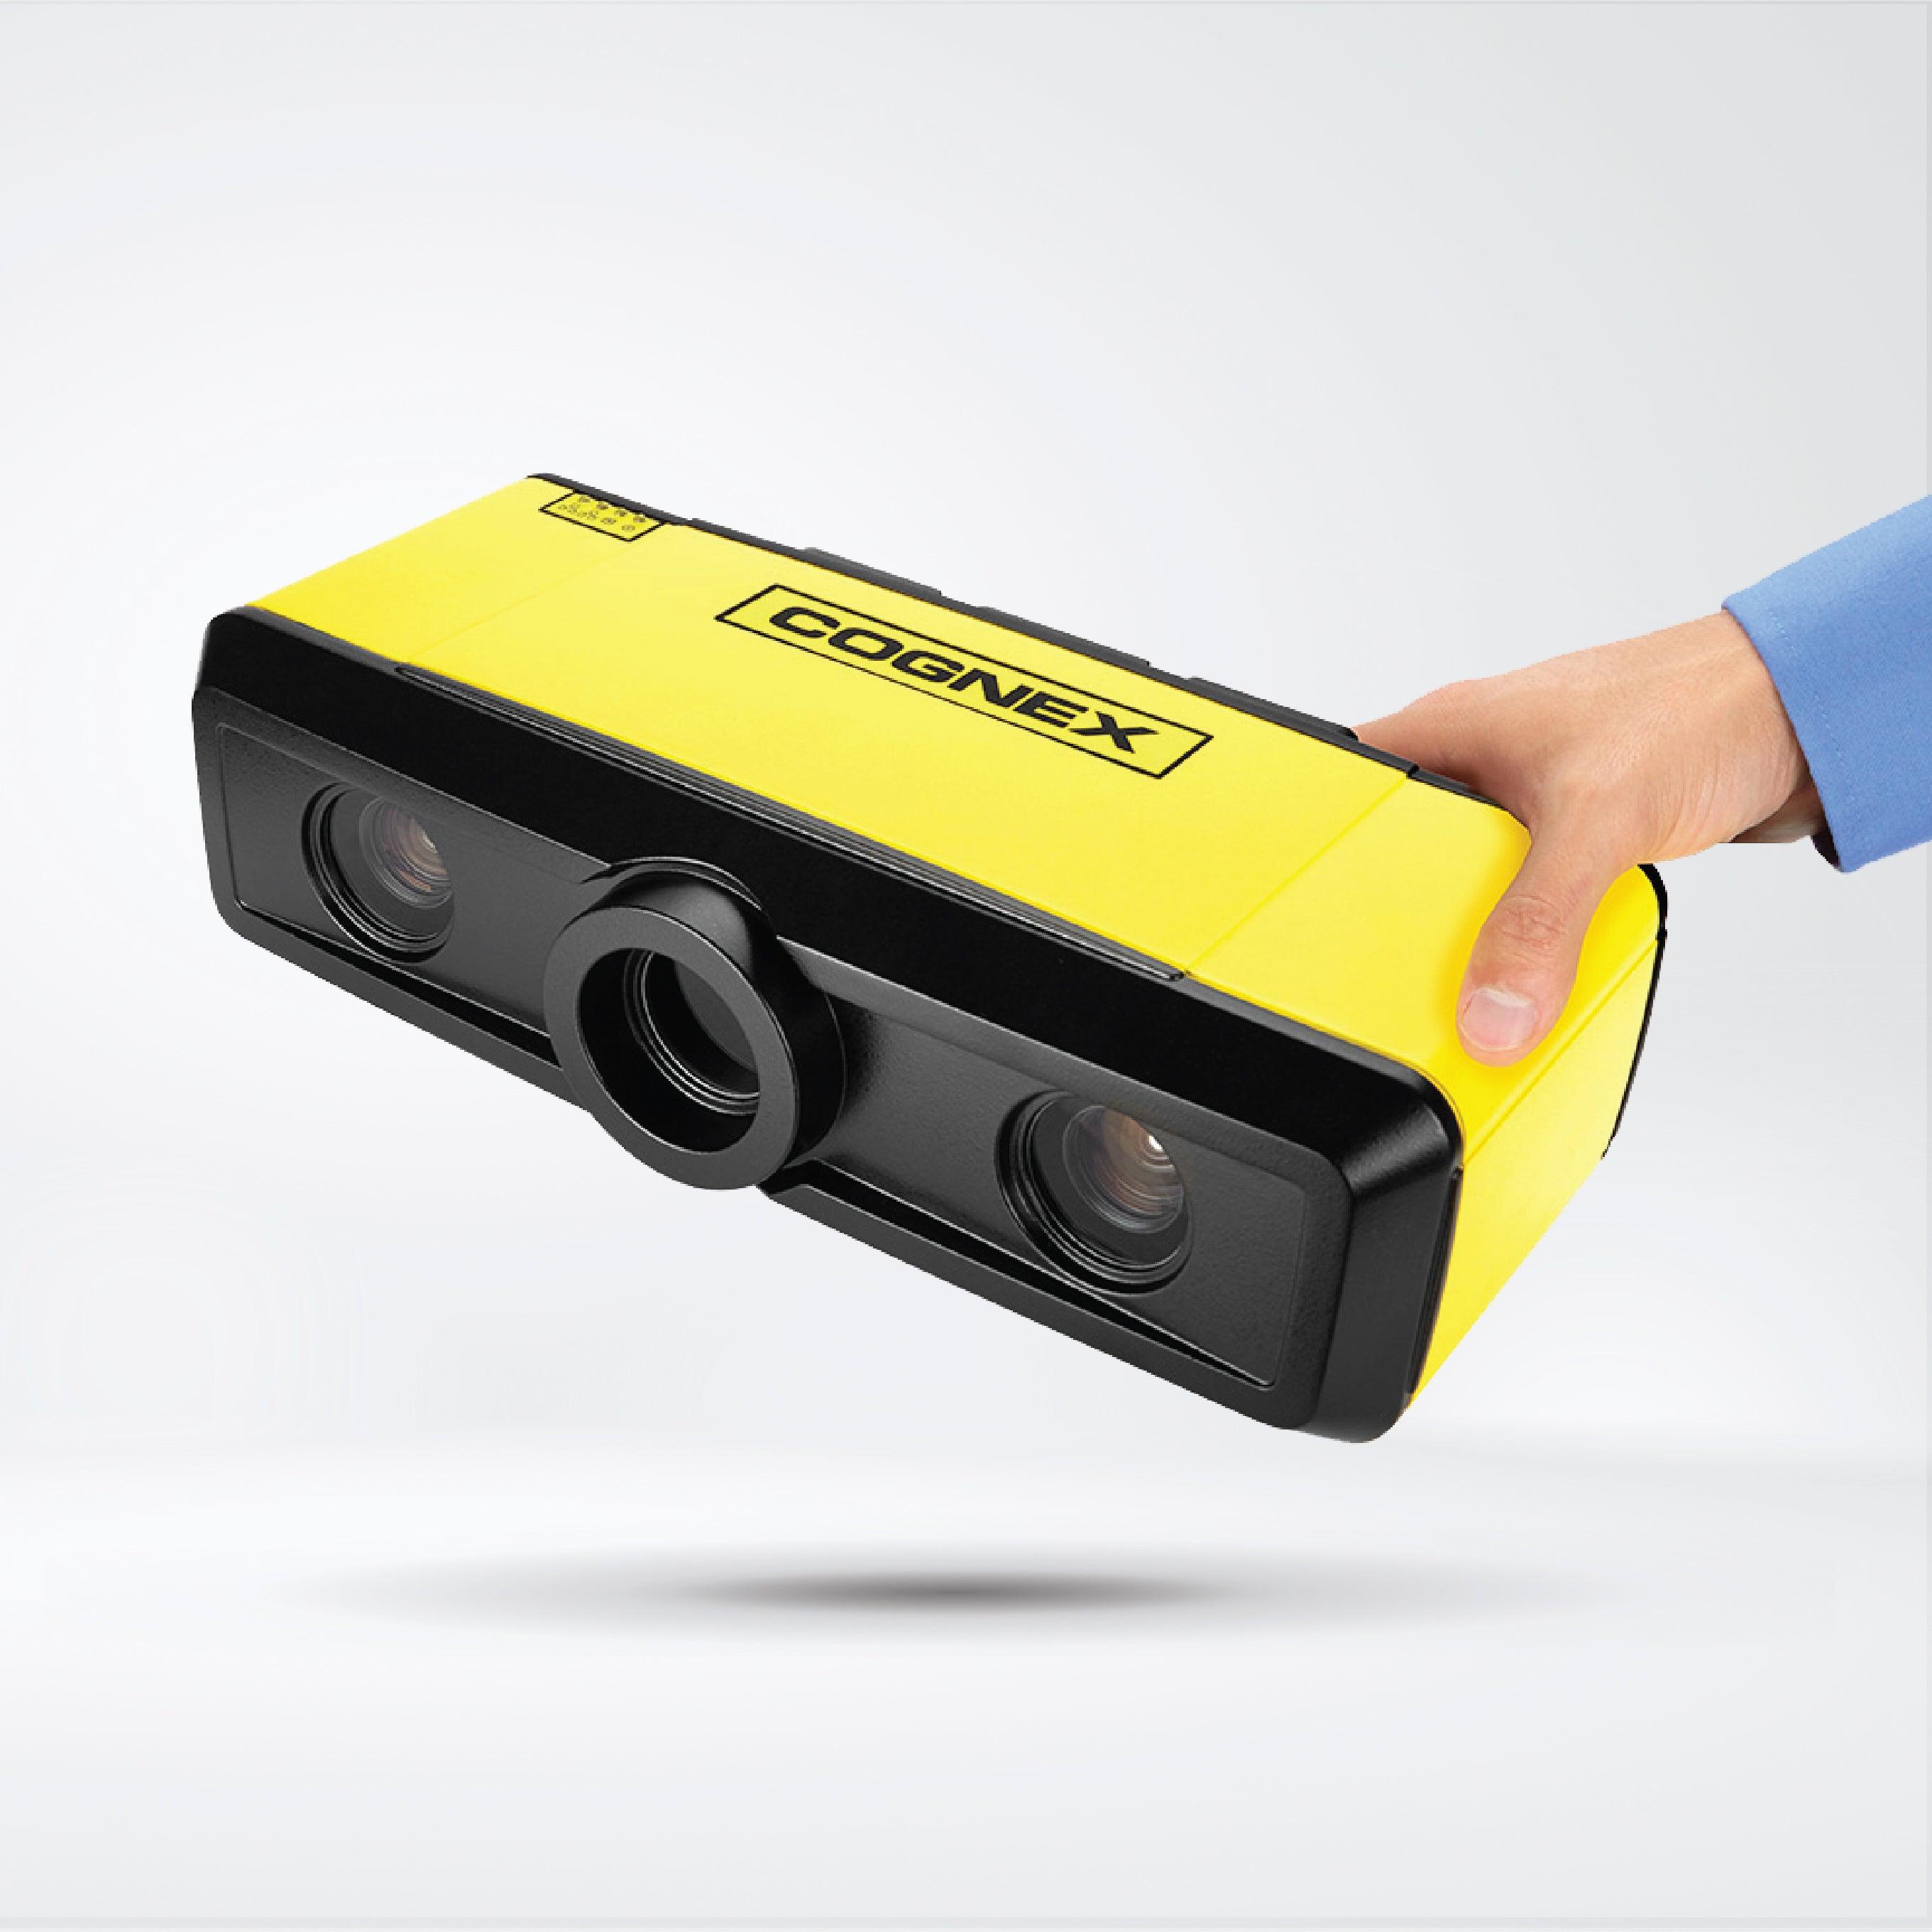 3D-A5000 series area scan 3D camera , Solves 3D applications with unmatched performance, accuracy, and ruggedness - Riverplus